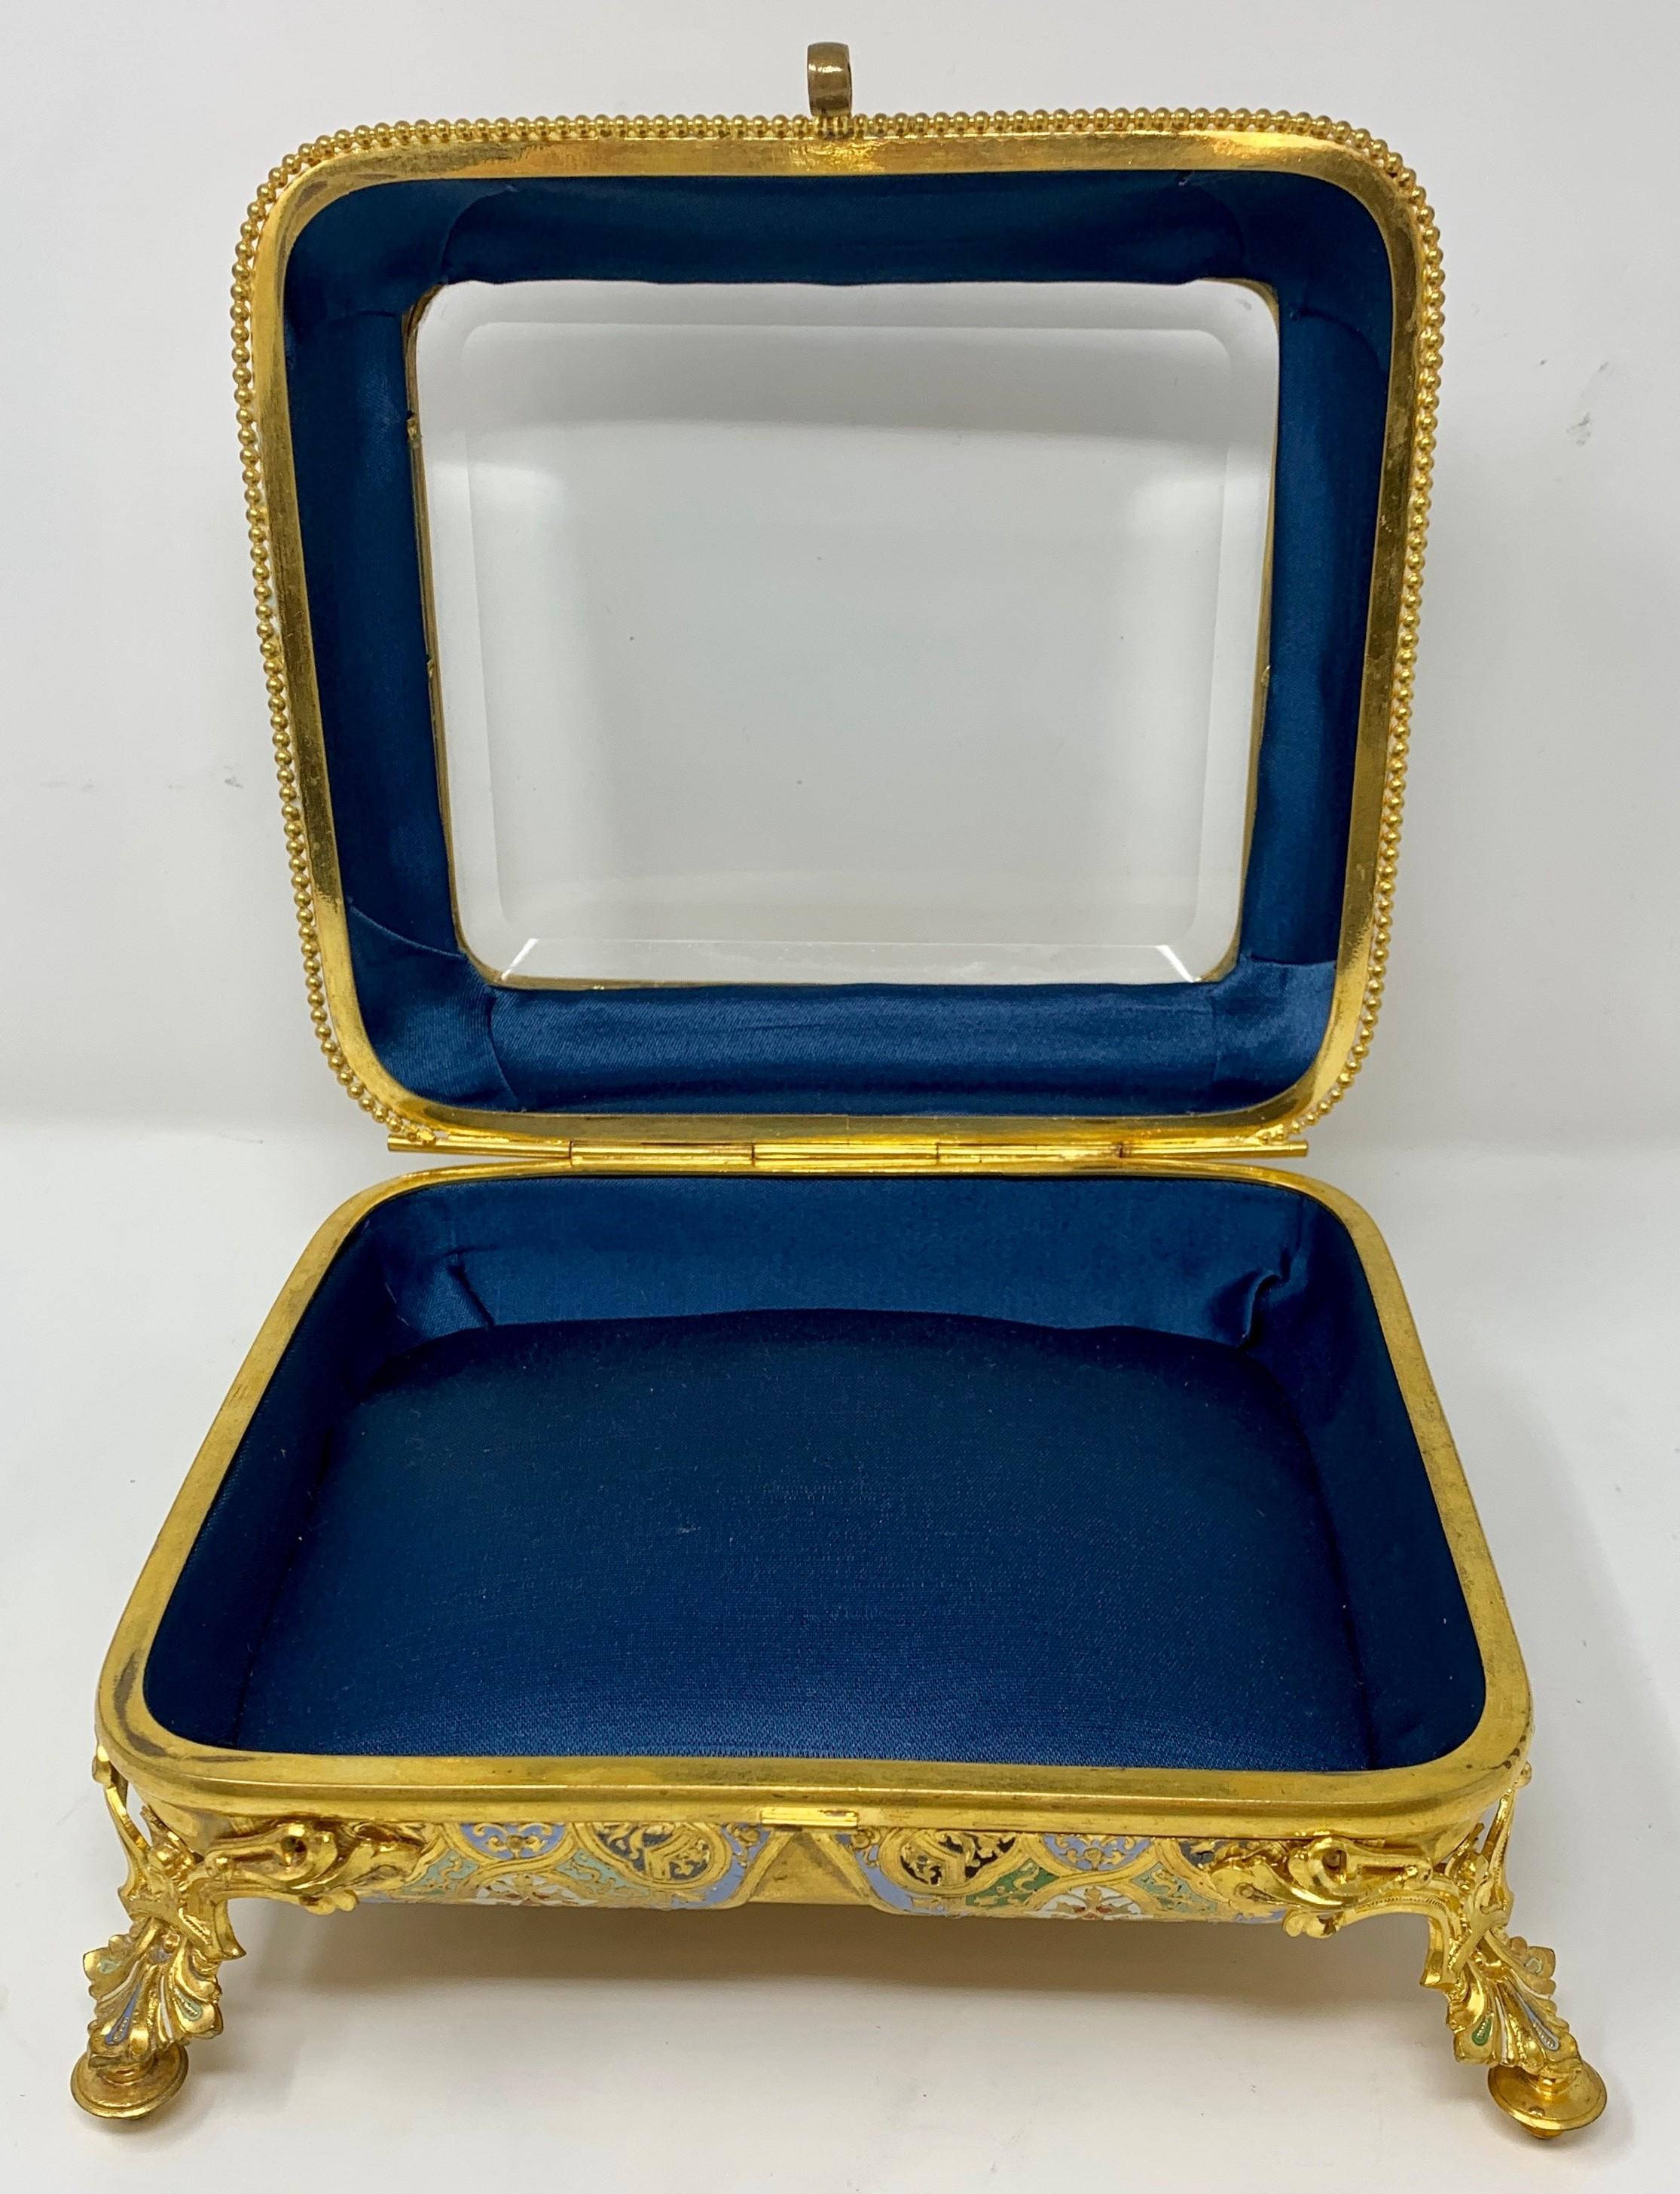 Antique French Napoleon III Ormolu and Cloisonné Jewel Box In Good Condition For Sale In New Orleans, LA